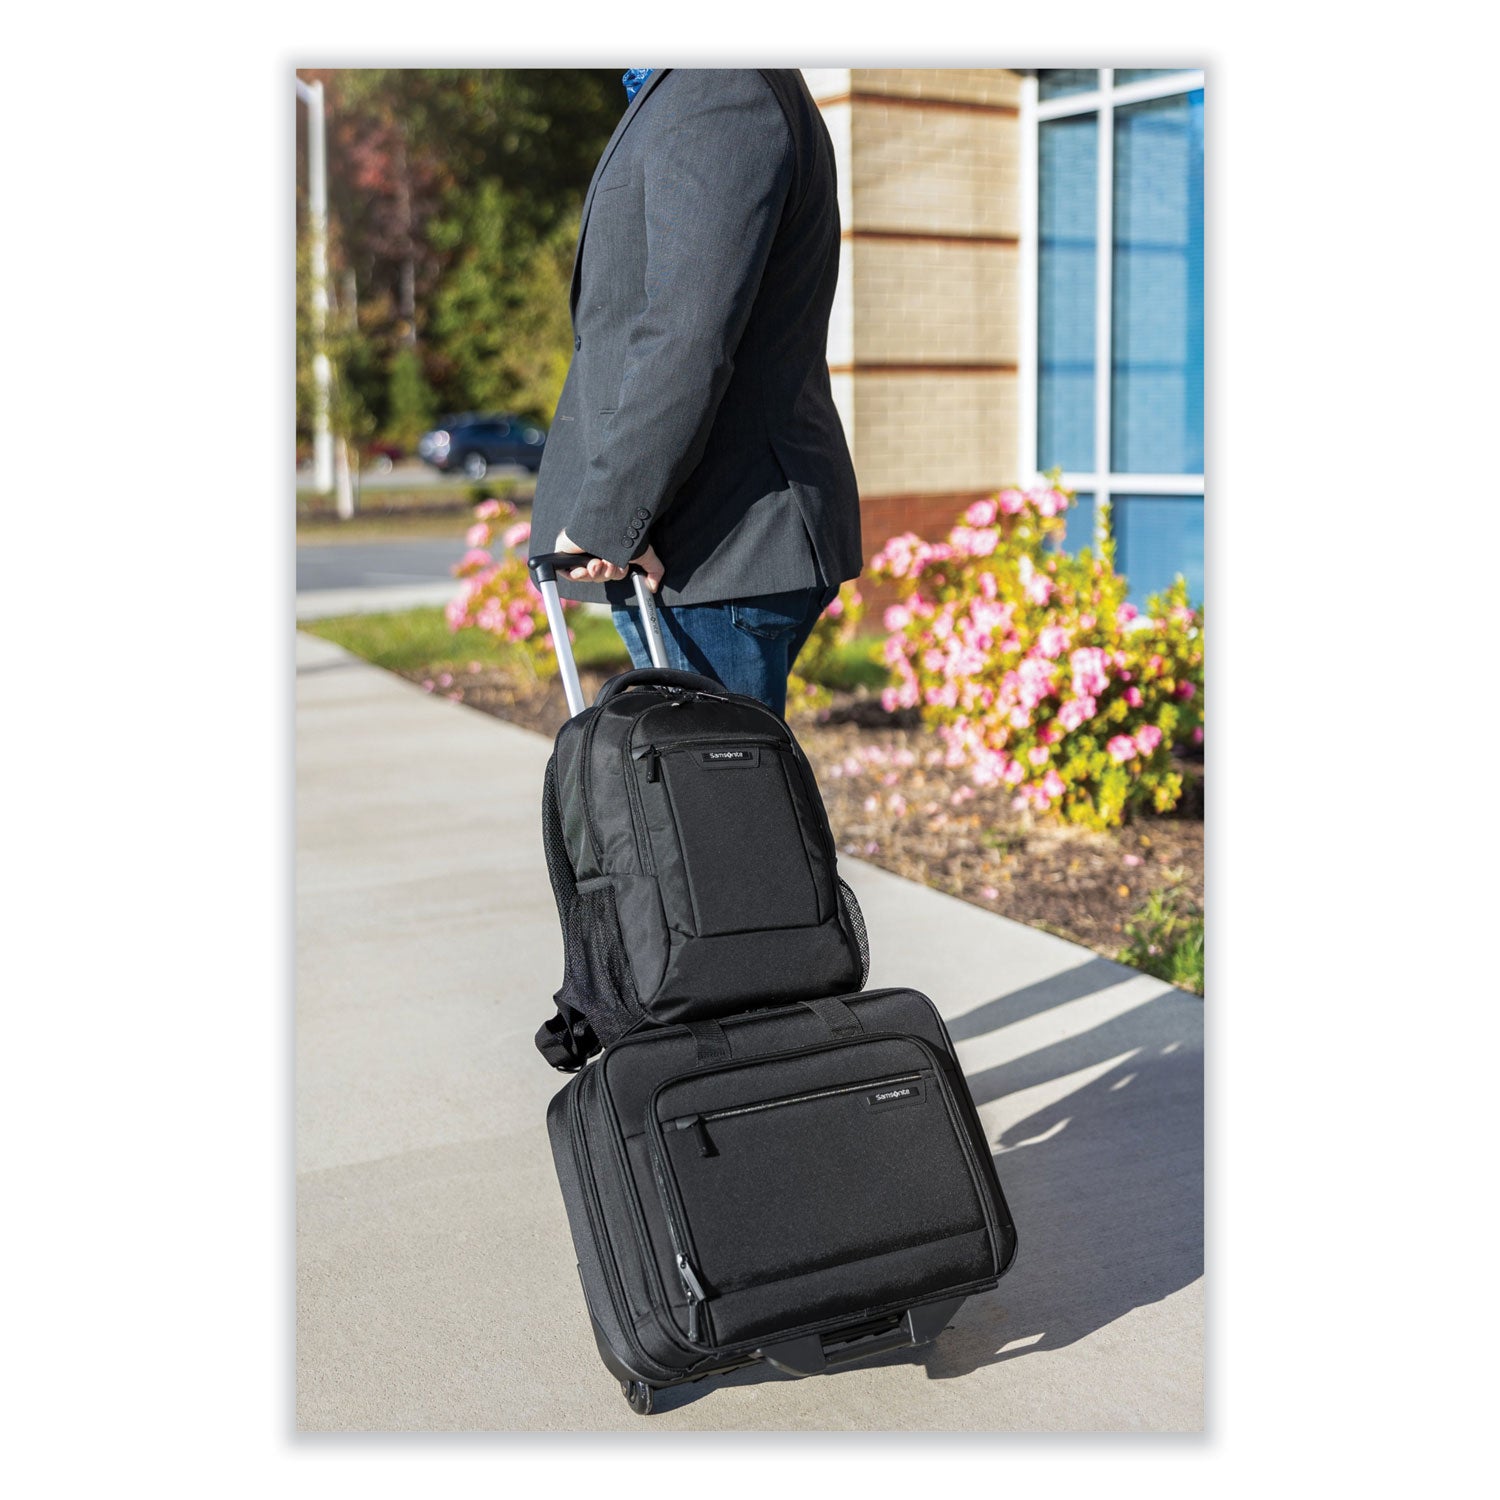 rolling-business-case-fits-devices-up-to-156-polyester-1654-x-8-x-906-black_sml1412781041 - 5